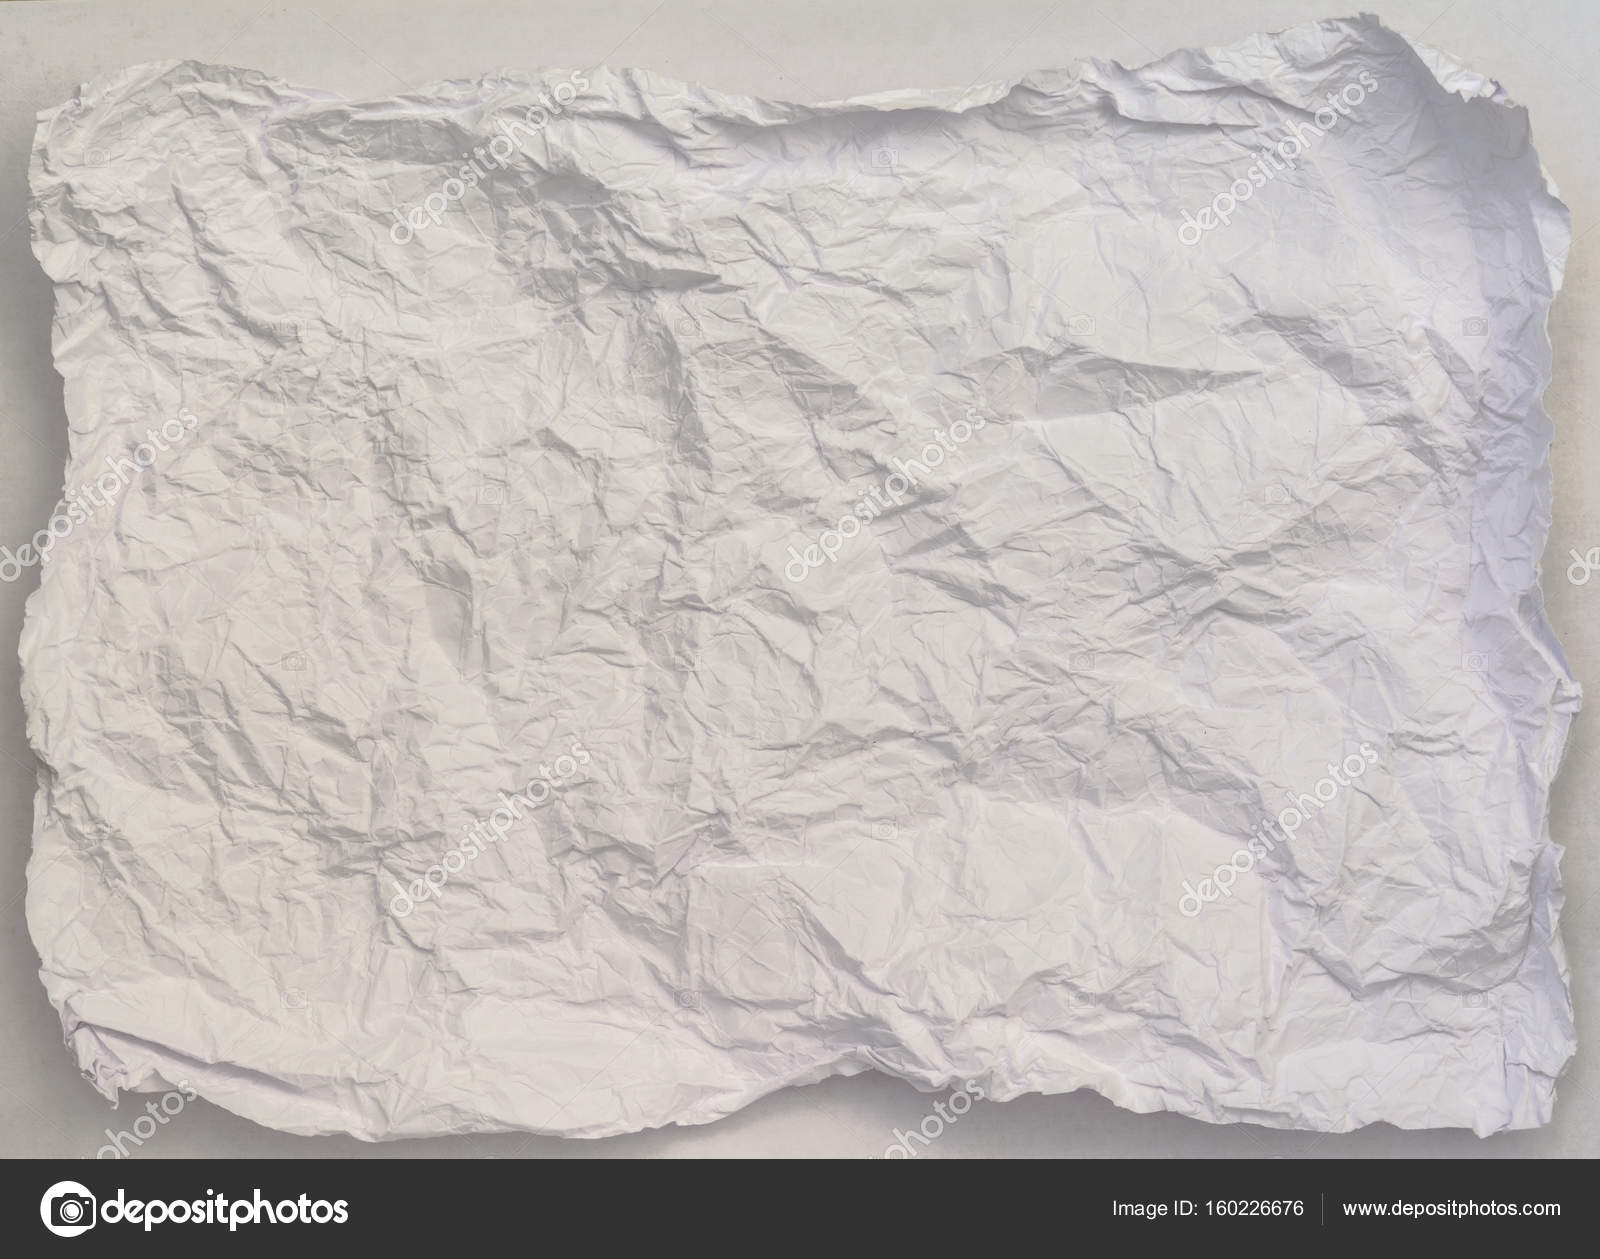 crumpled paper texture background, — Stock Photo © nnorozoff #160226676